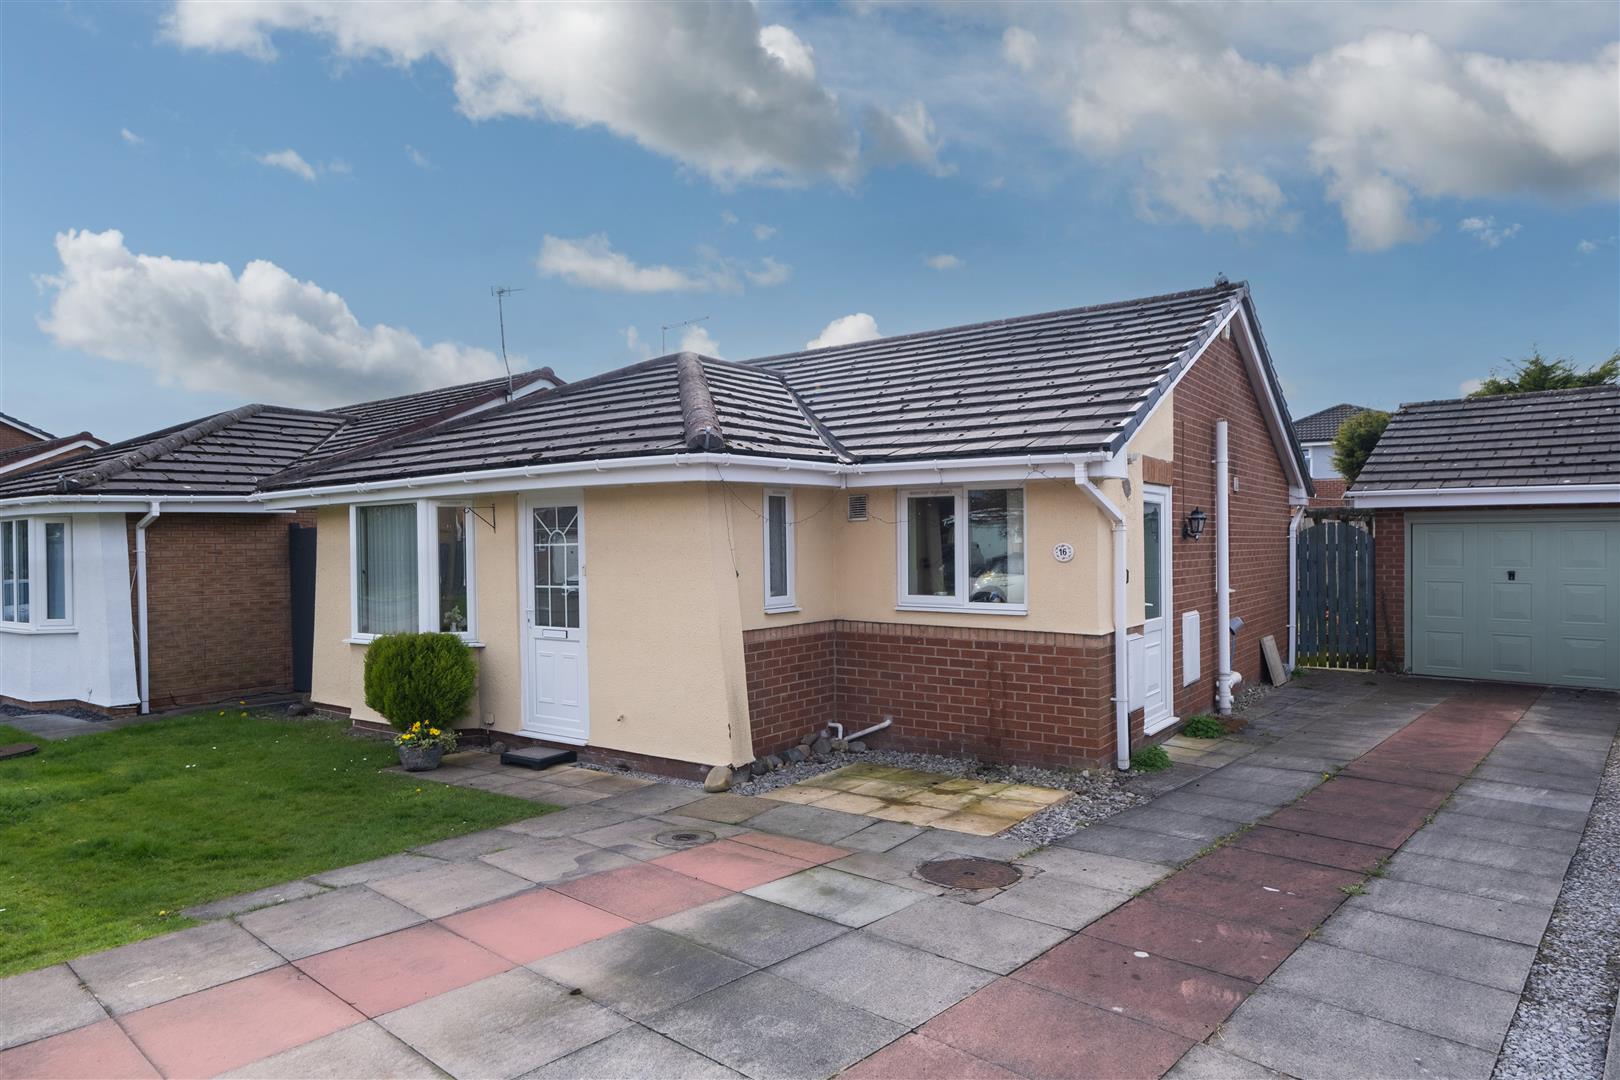 2 bedroom  Bungalow for Sale in Winsford